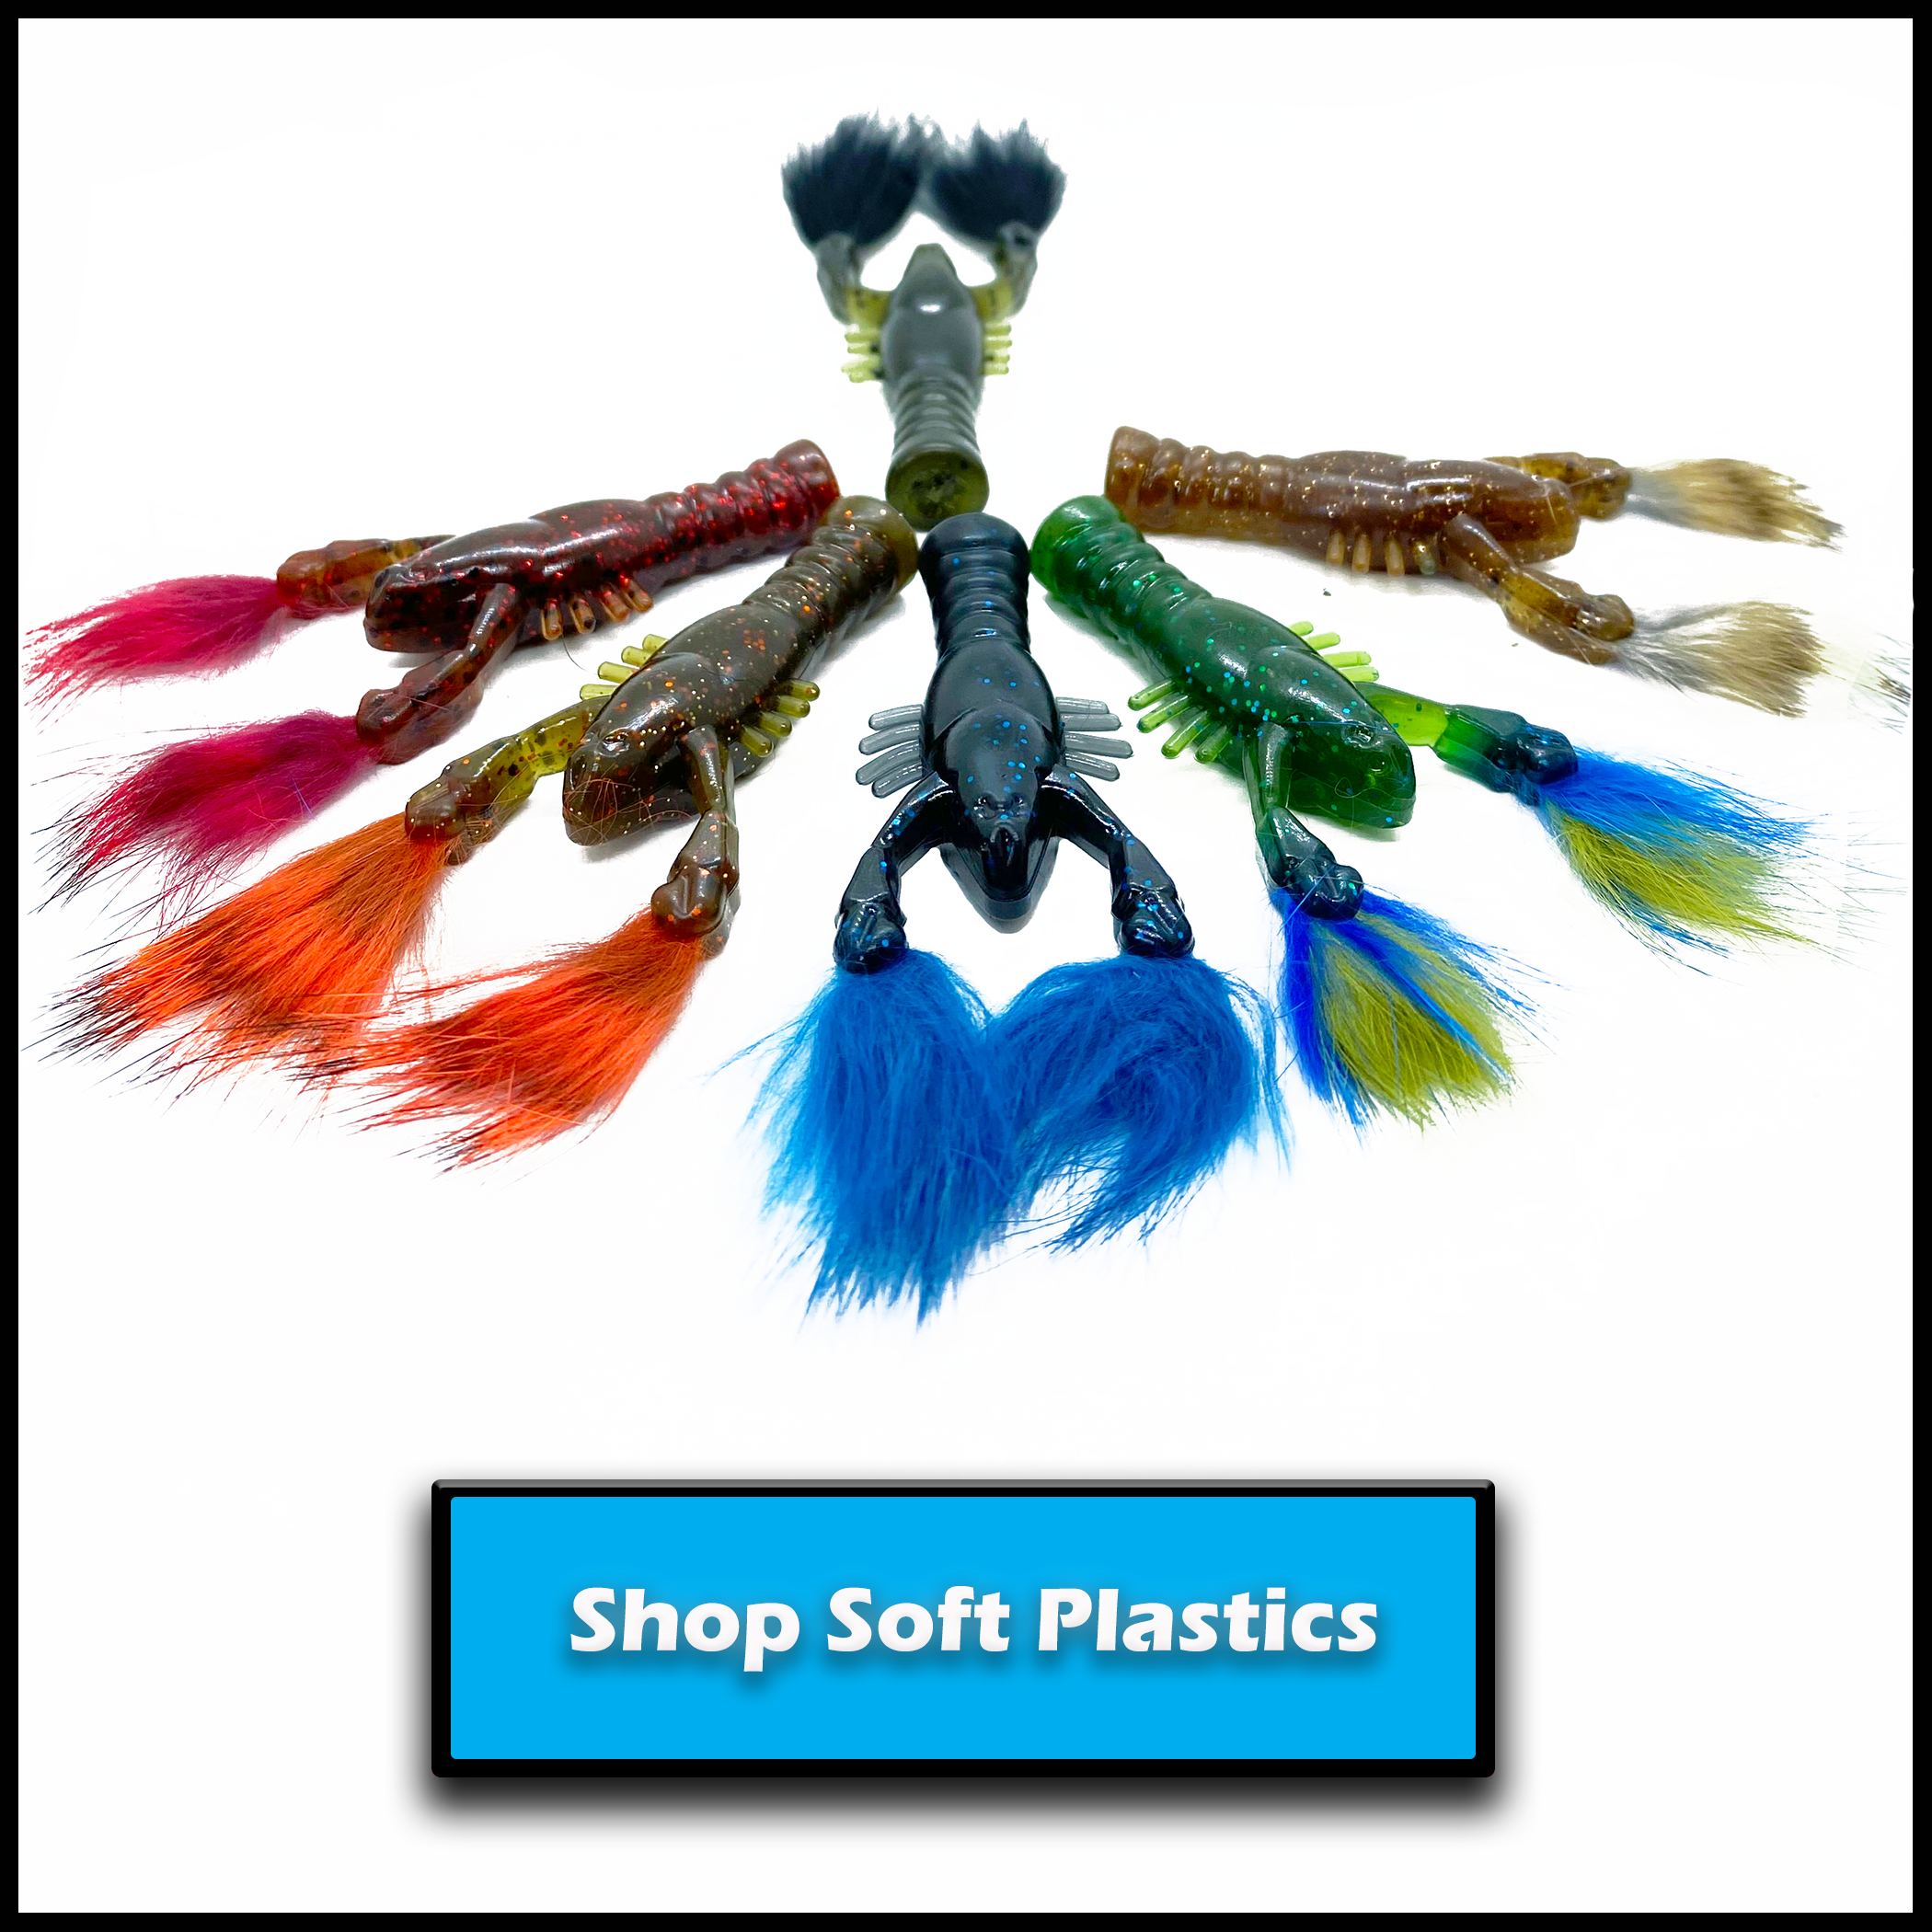 Soft Fishing Lures + Hair - Catch More Fish With Rabid Baits!